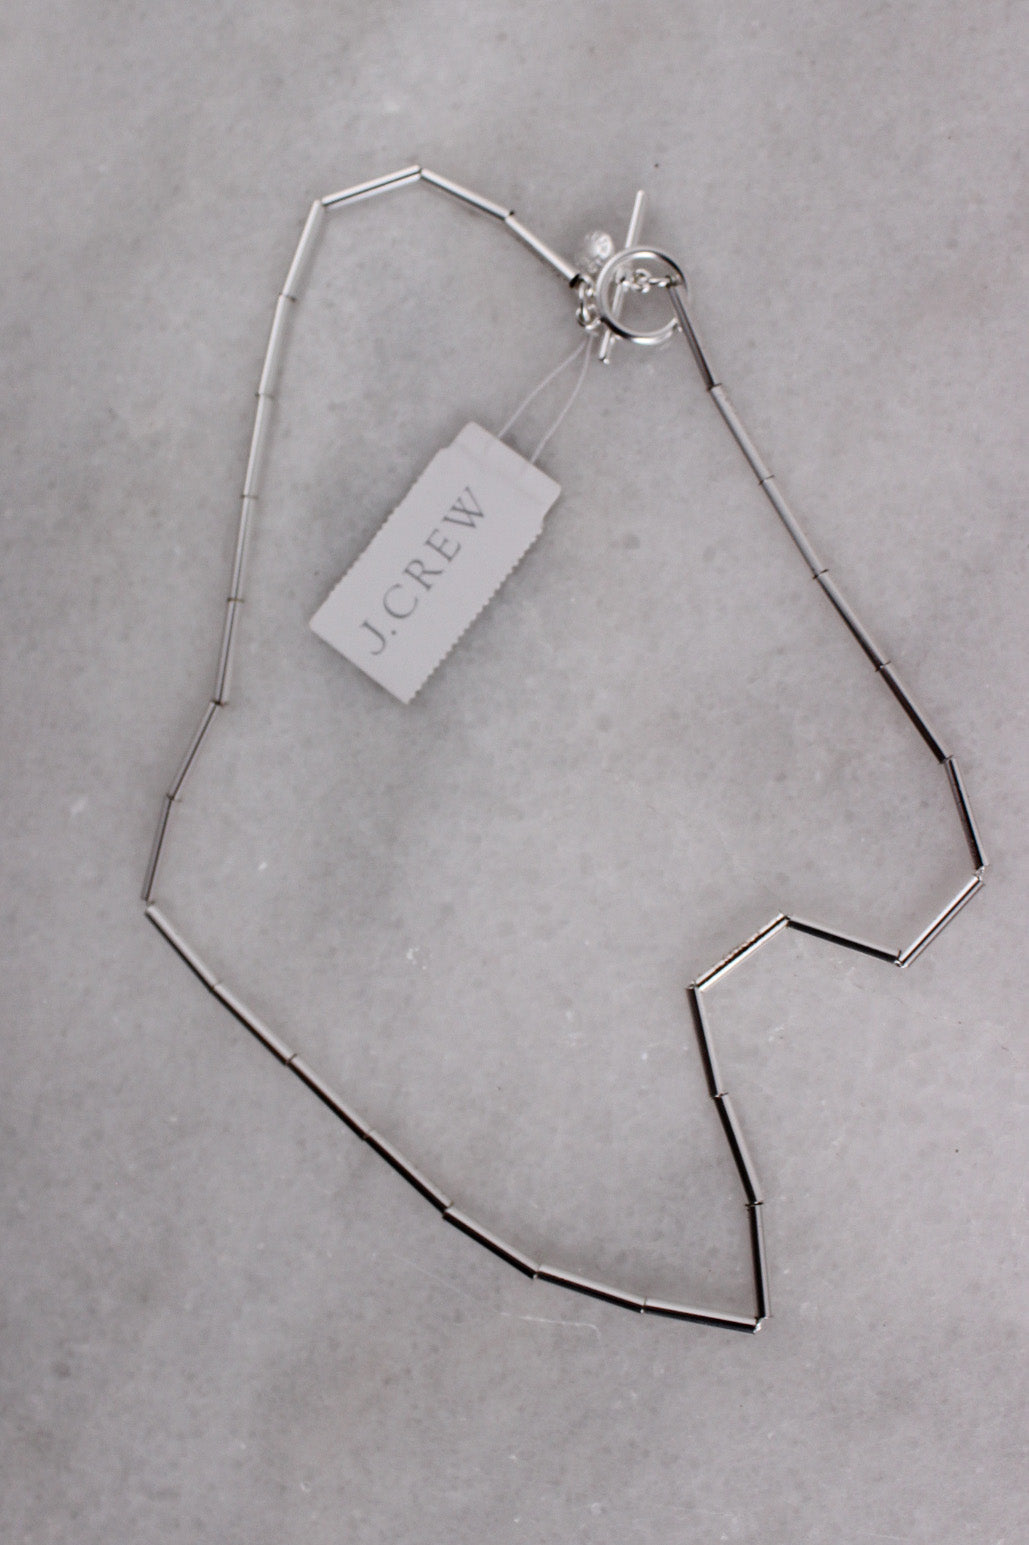 elevated angle j.crew silver toned metal necklace featuring cylindrical bead design, circular branded charm, and toggle closure laid on marble background.